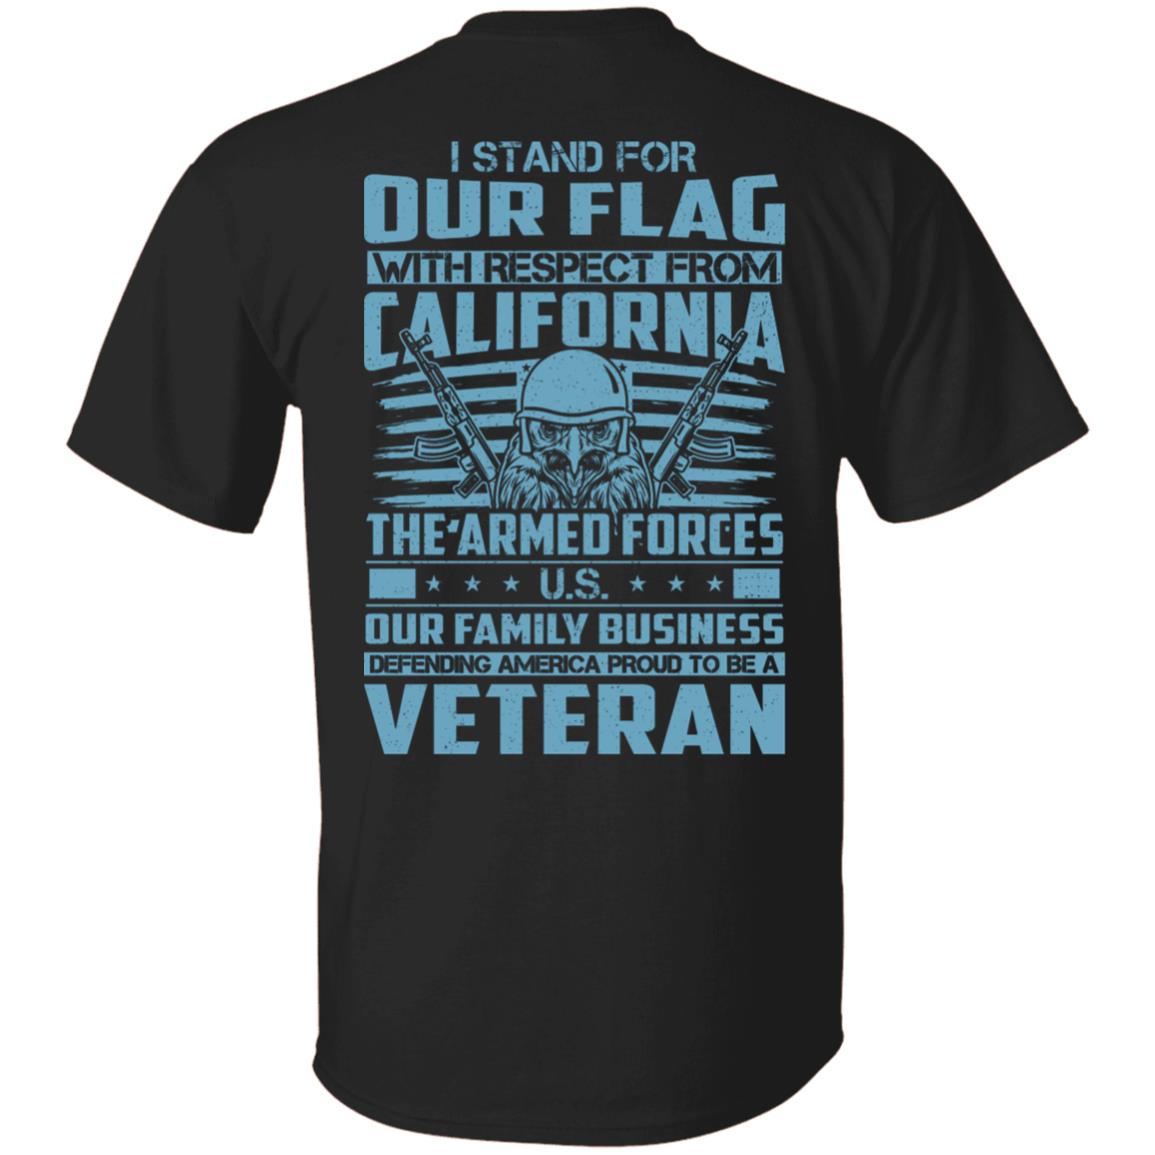 I Stand For Our Flag with Respect from California US Flag Veteran Shirt